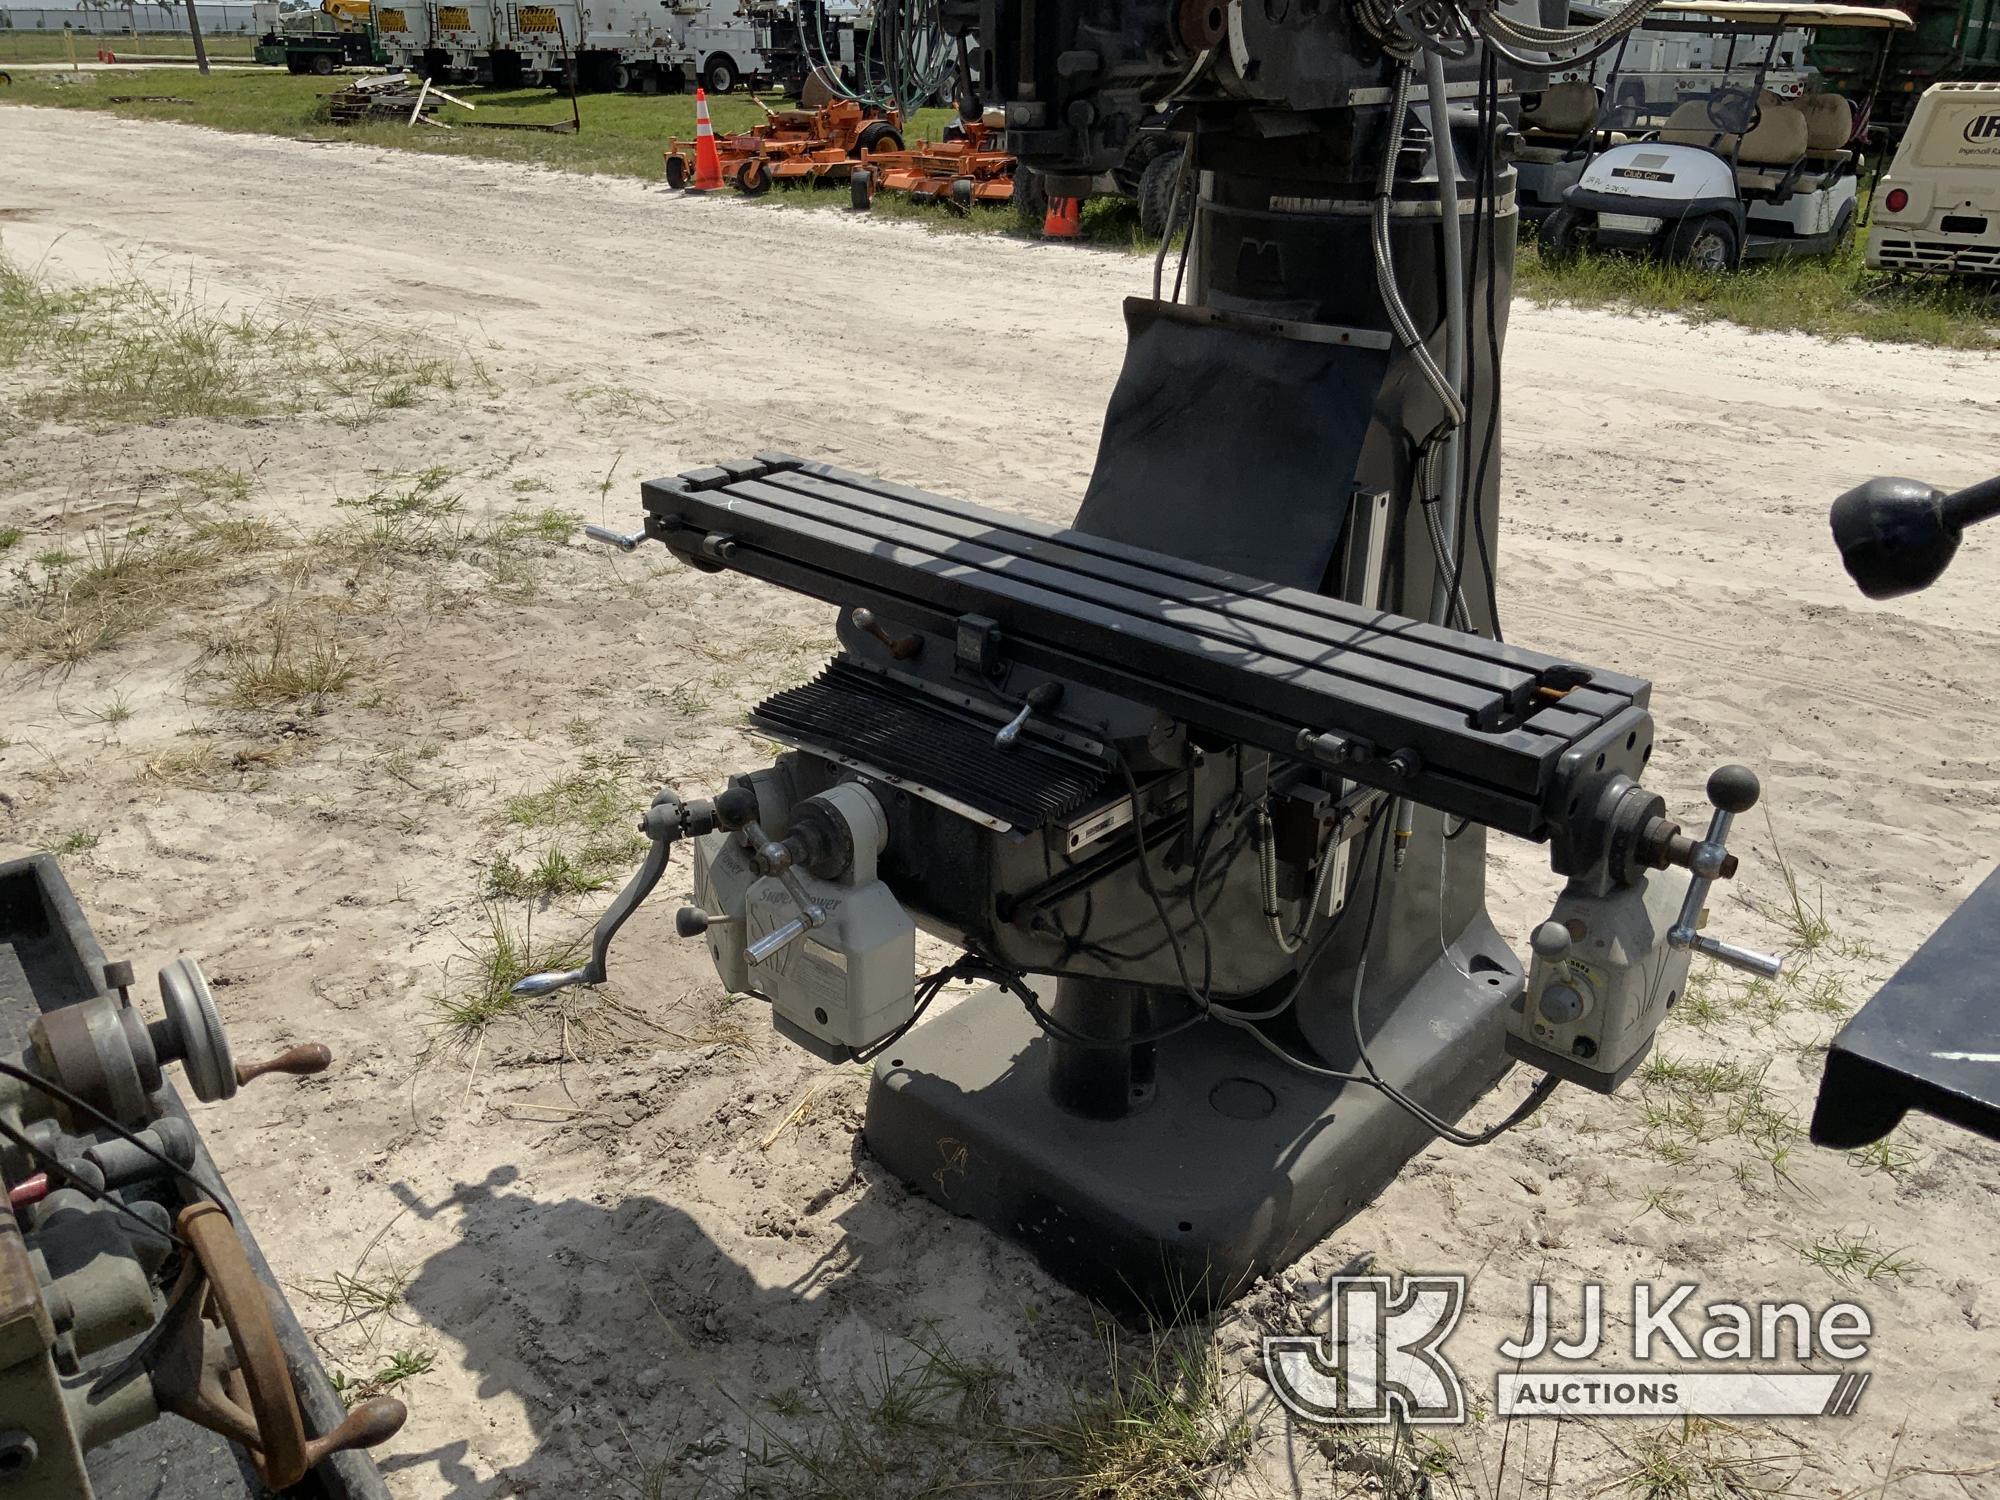 (Westlake, FL) Vectrax CL Series Drill Press (Condition Unknown) NOTE: This unit is being sold AS IS